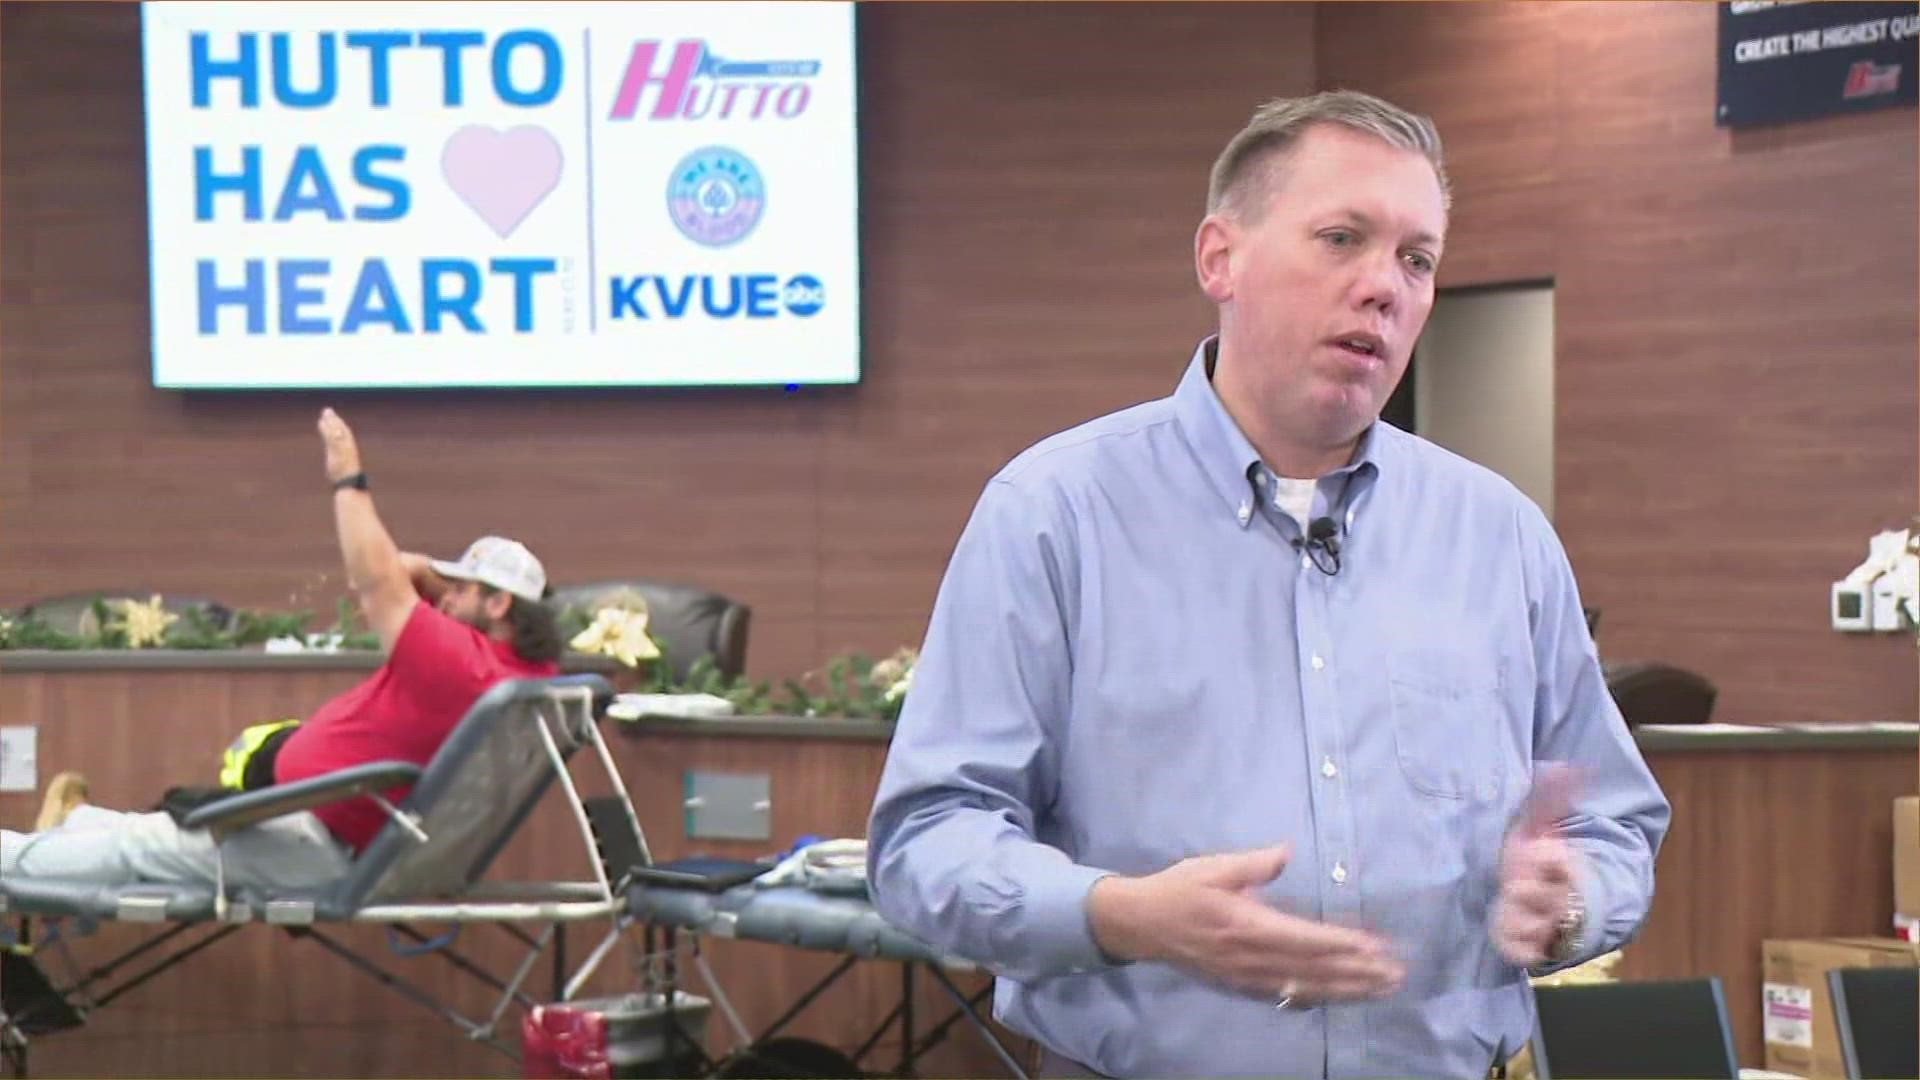 KVUE Cares, the City of Hutto and We Are Blood have partnered to bring blood donations to the community. Hutto Mayor Mike Snyder explains the benefits.